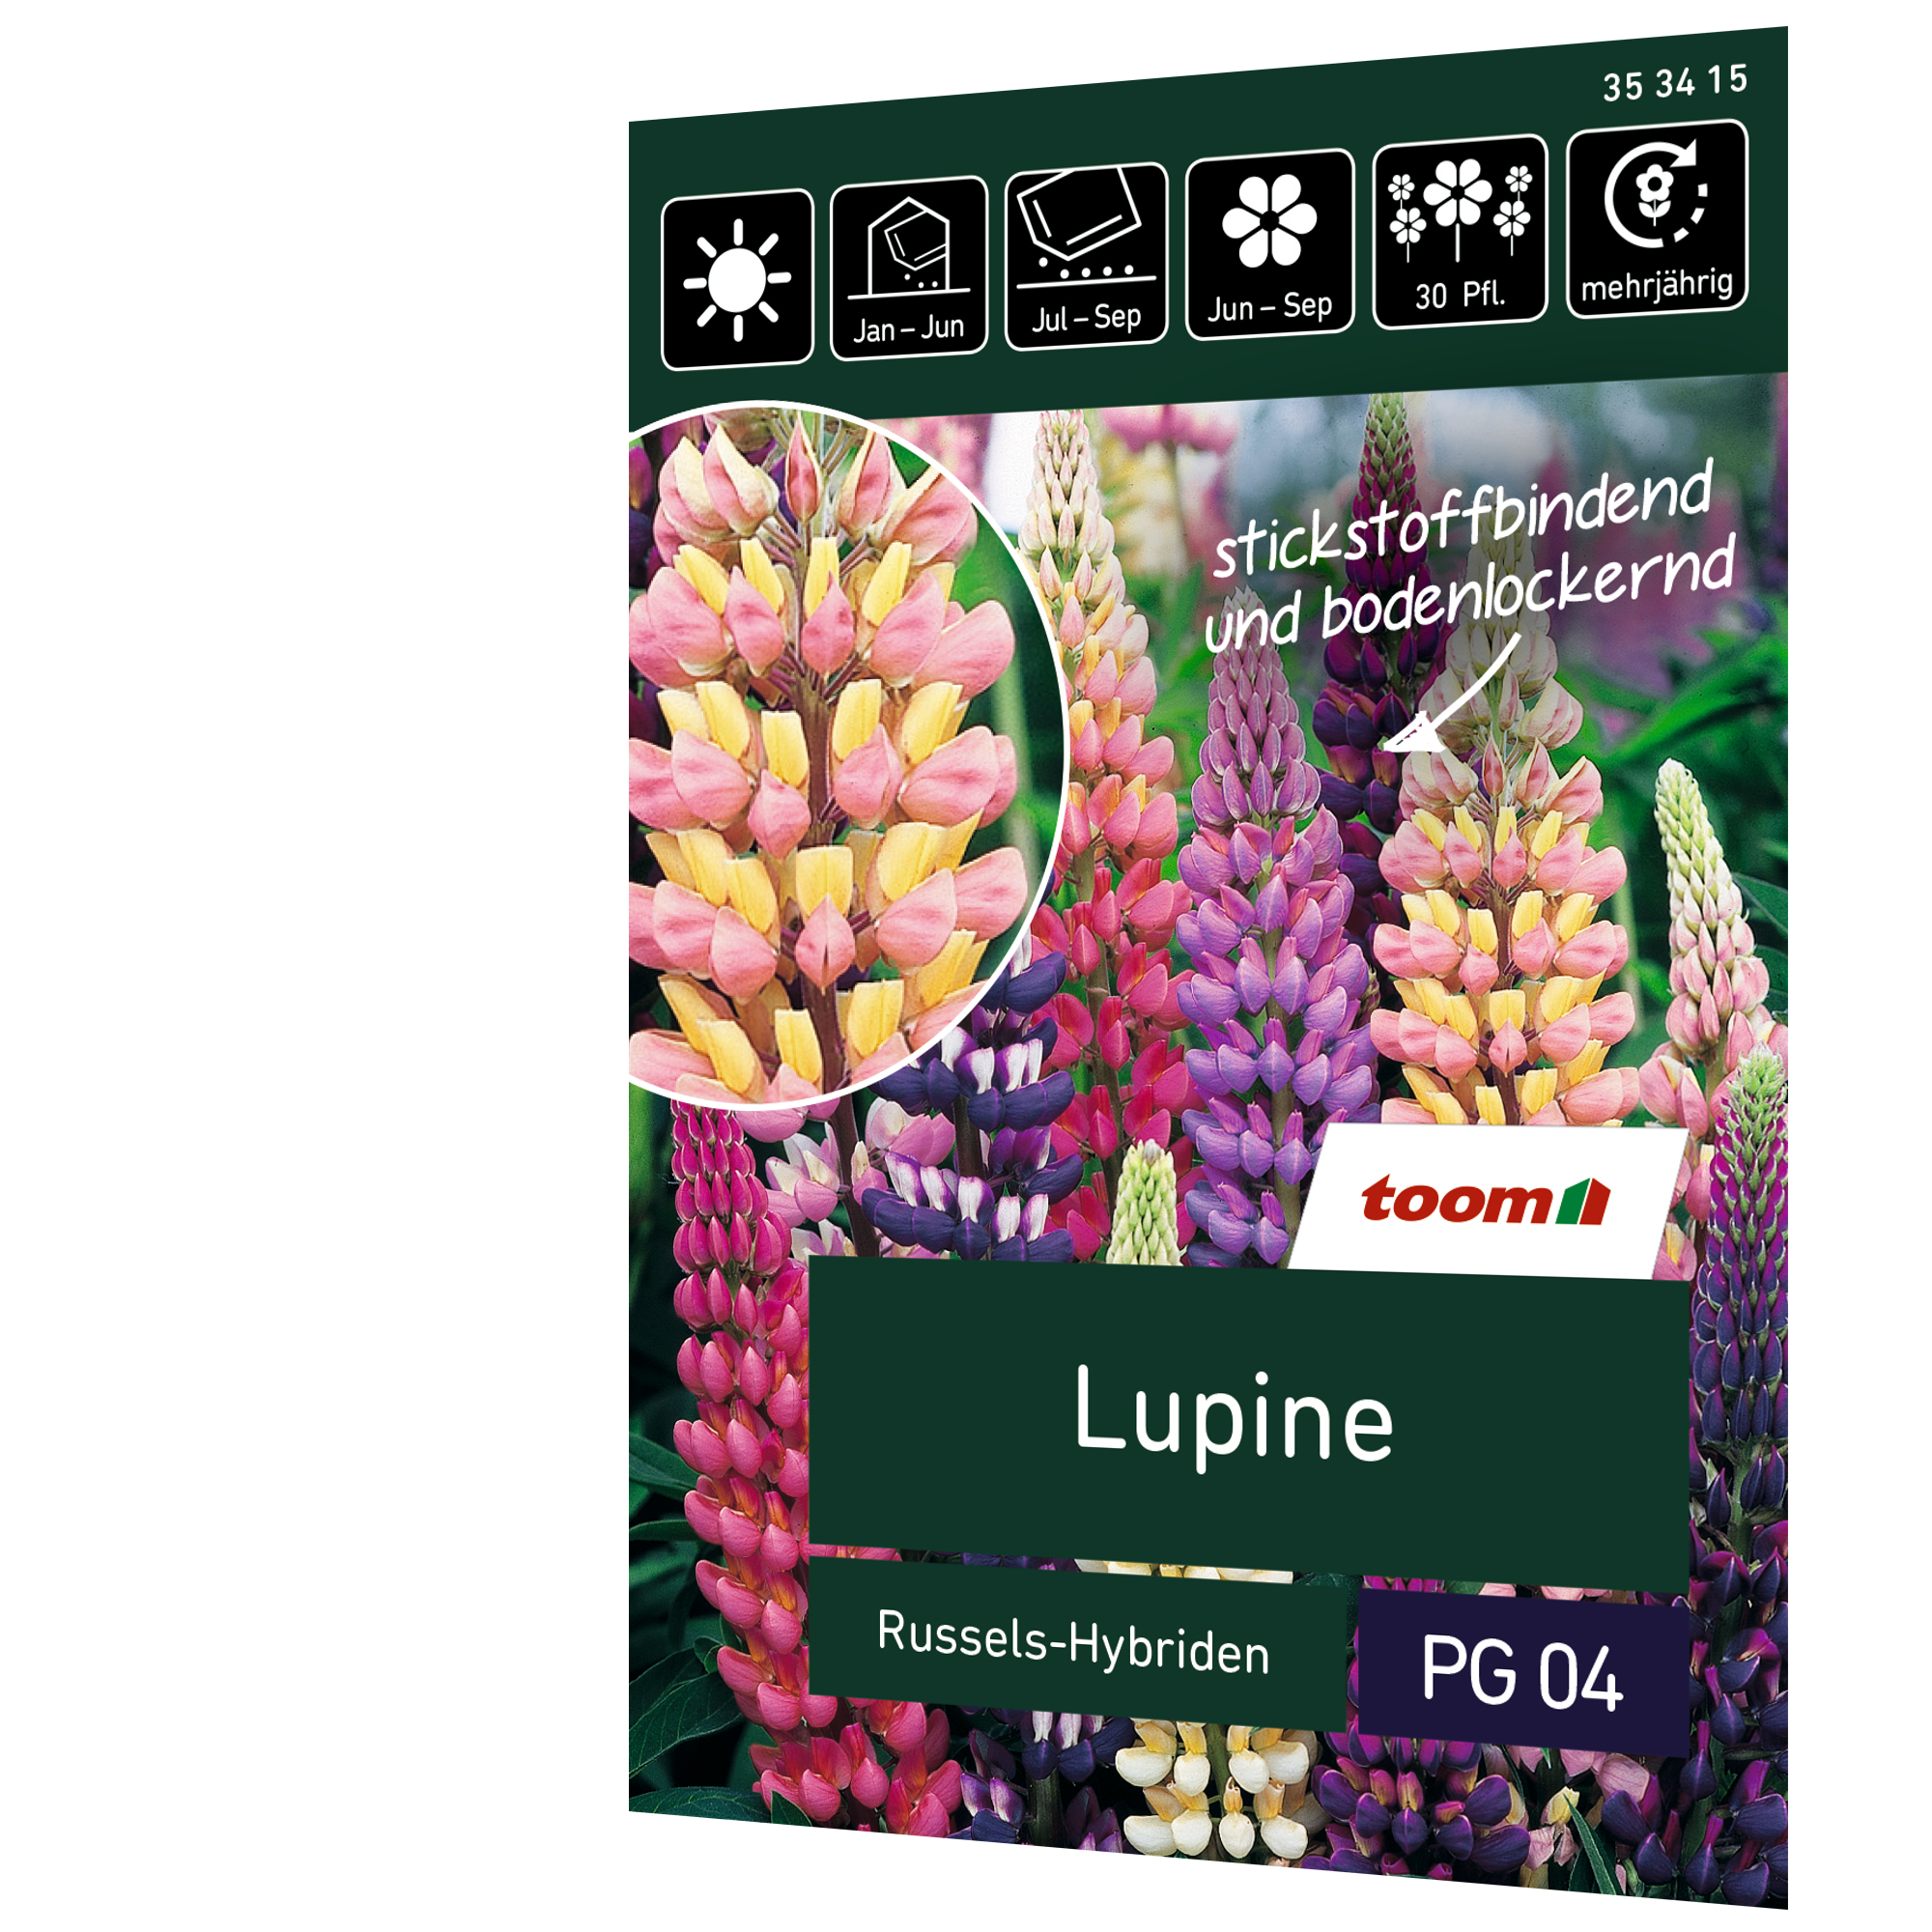 Lupine 'Russels-Hybriden' + product picture